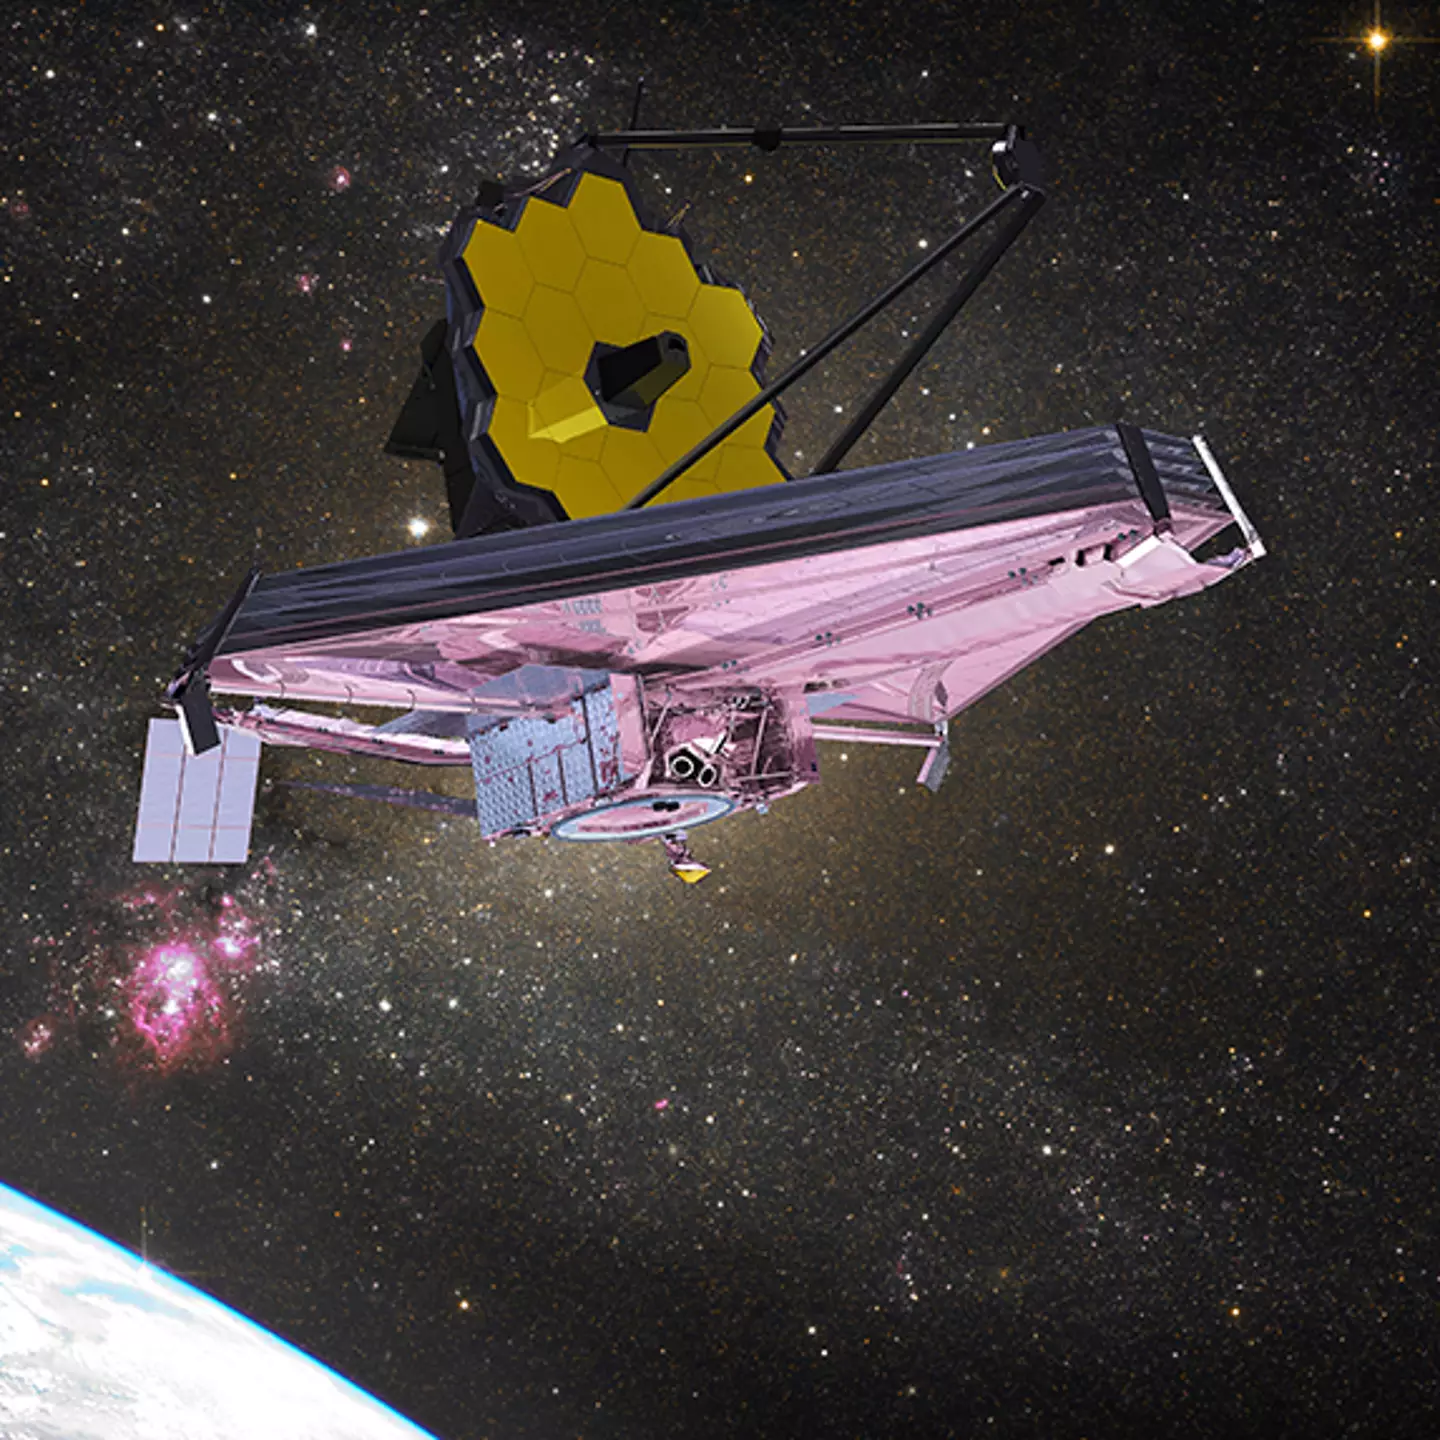 Webb telescope detects light from a planet similar to Earth in groundbreaking discovery